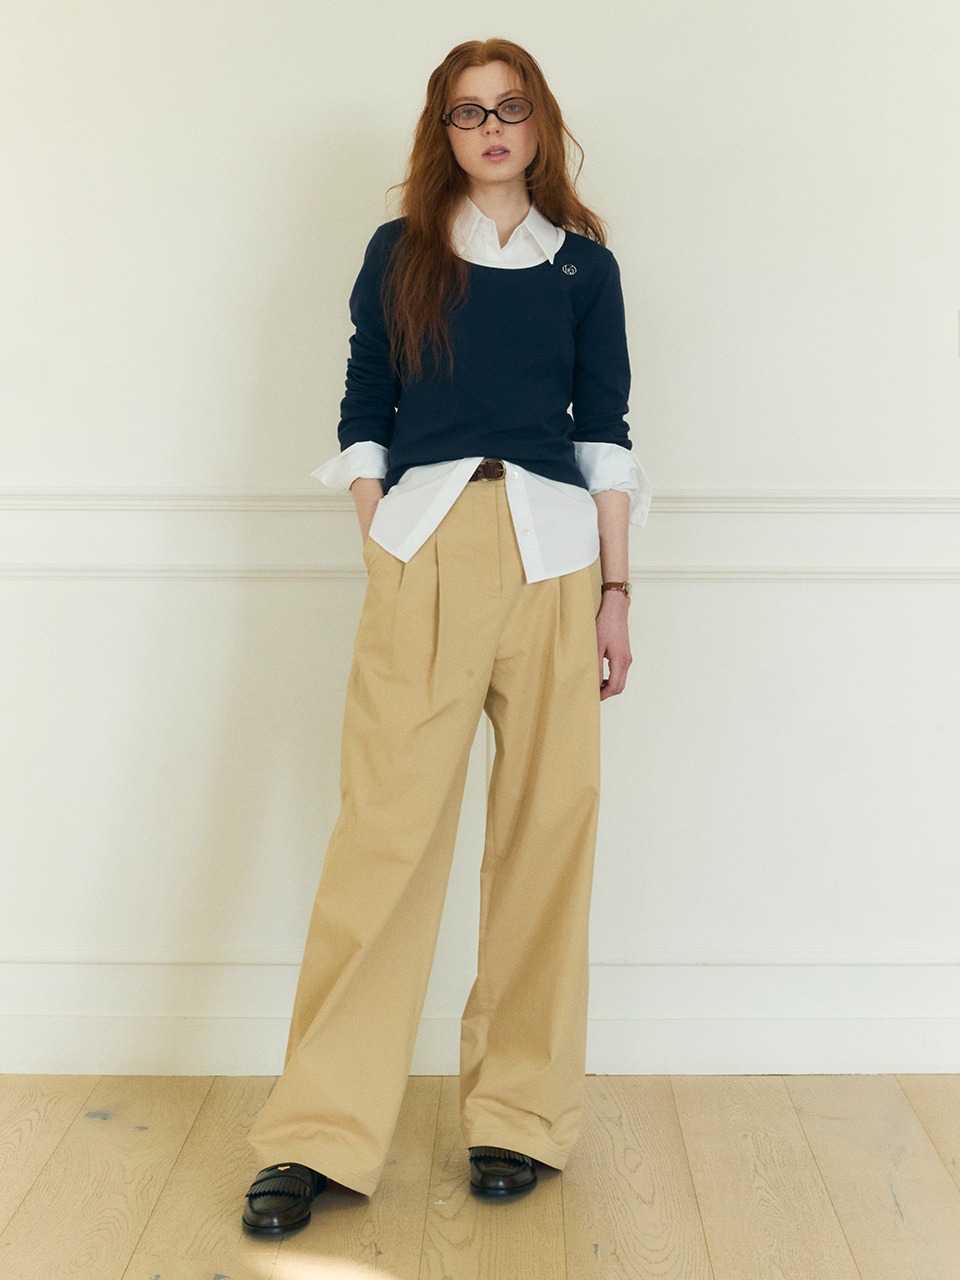 Cotton Wide Chino Pants Beige